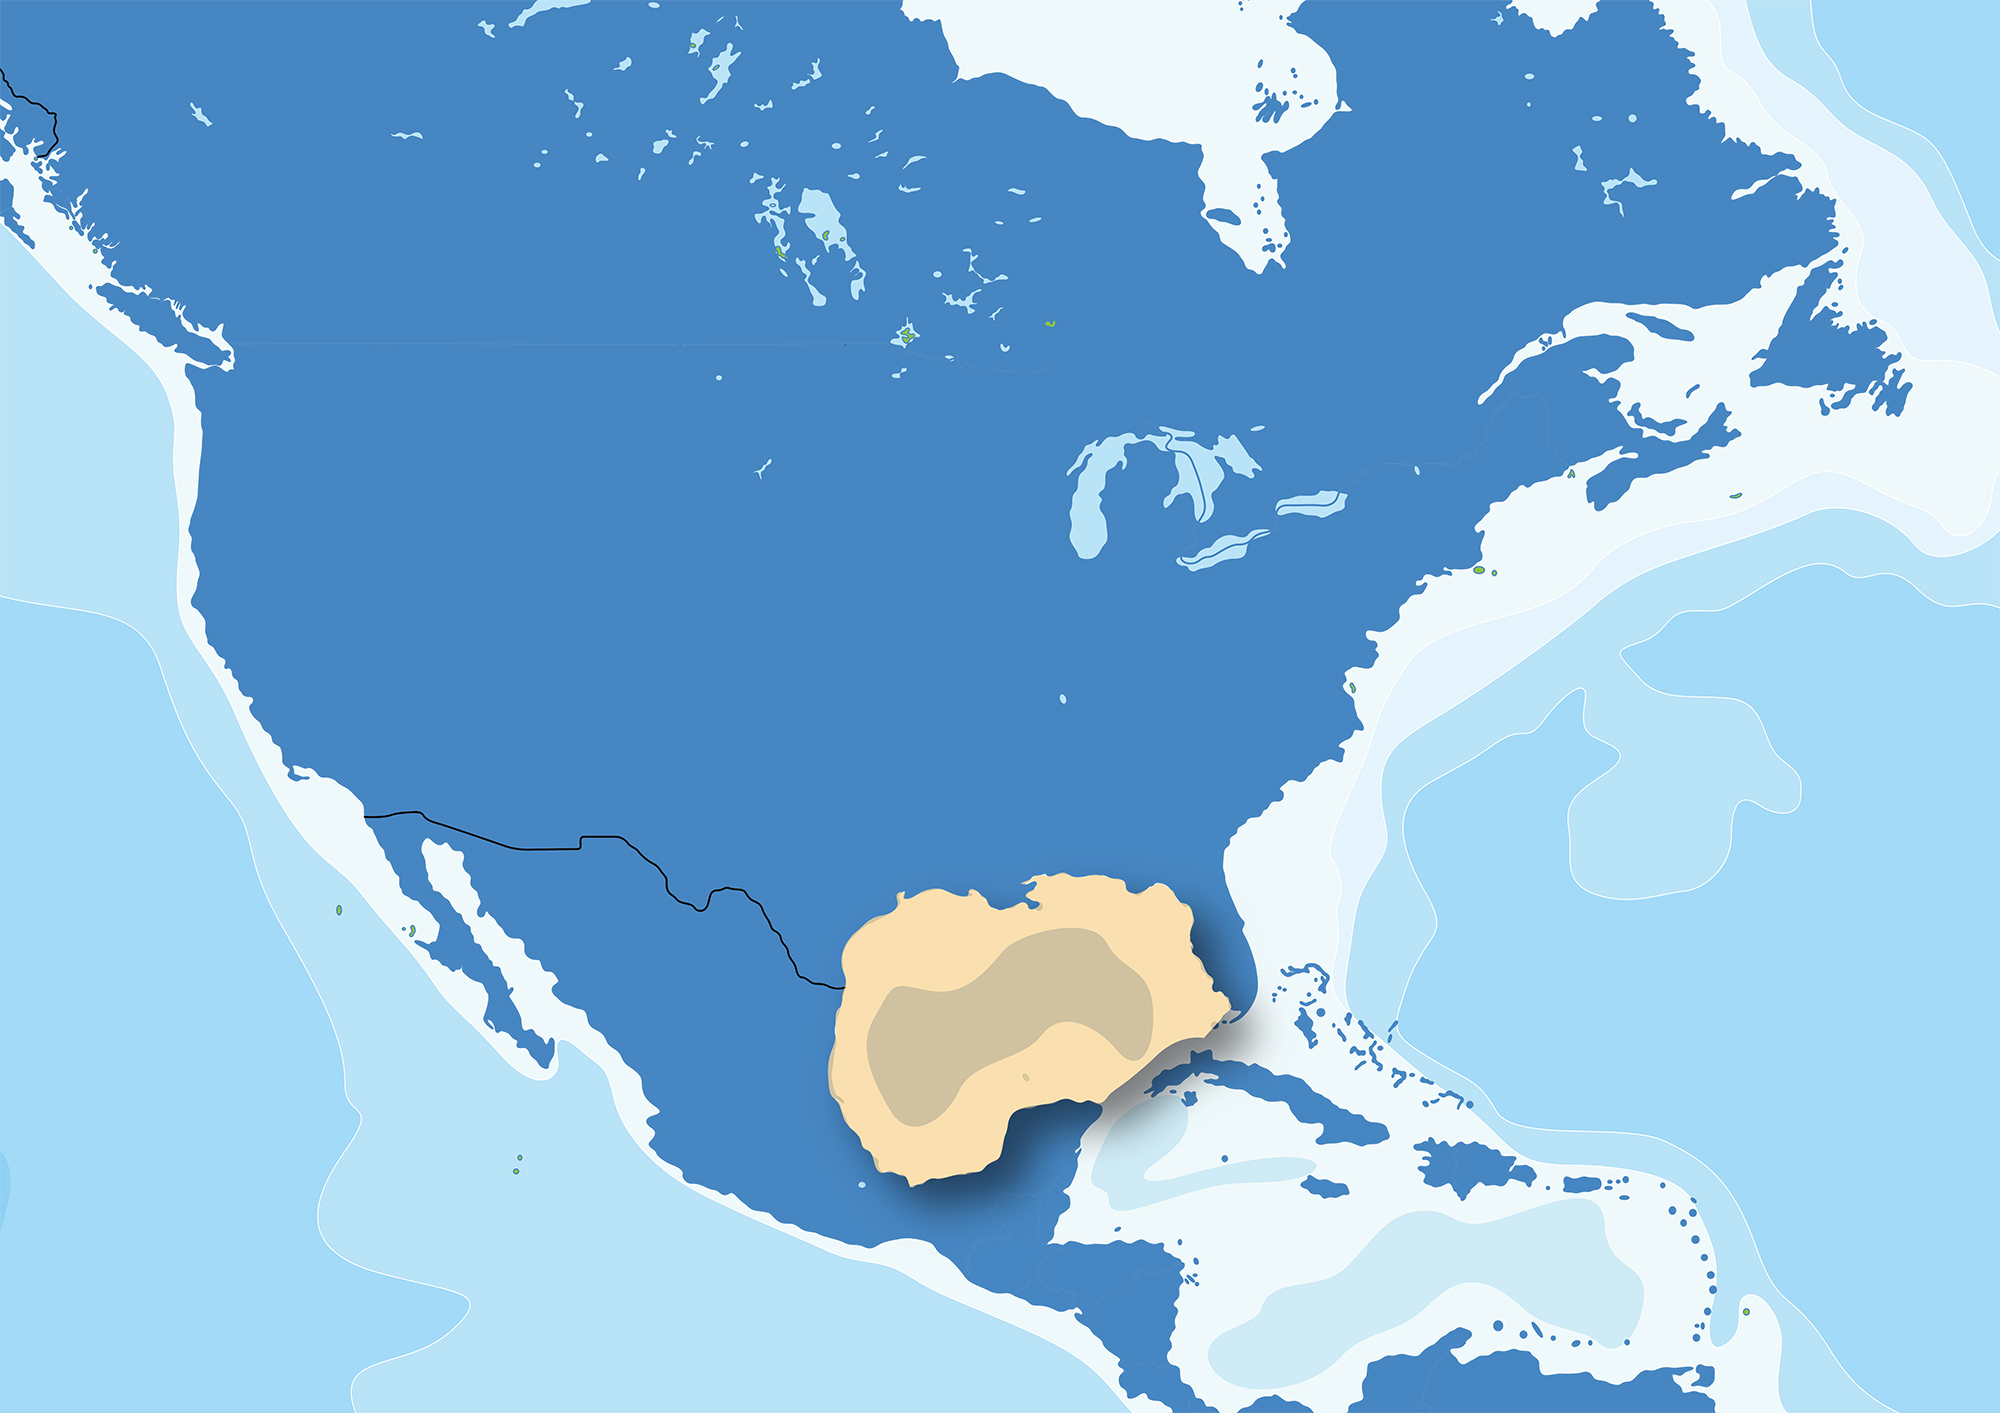 Map of Gulf of Mexico region